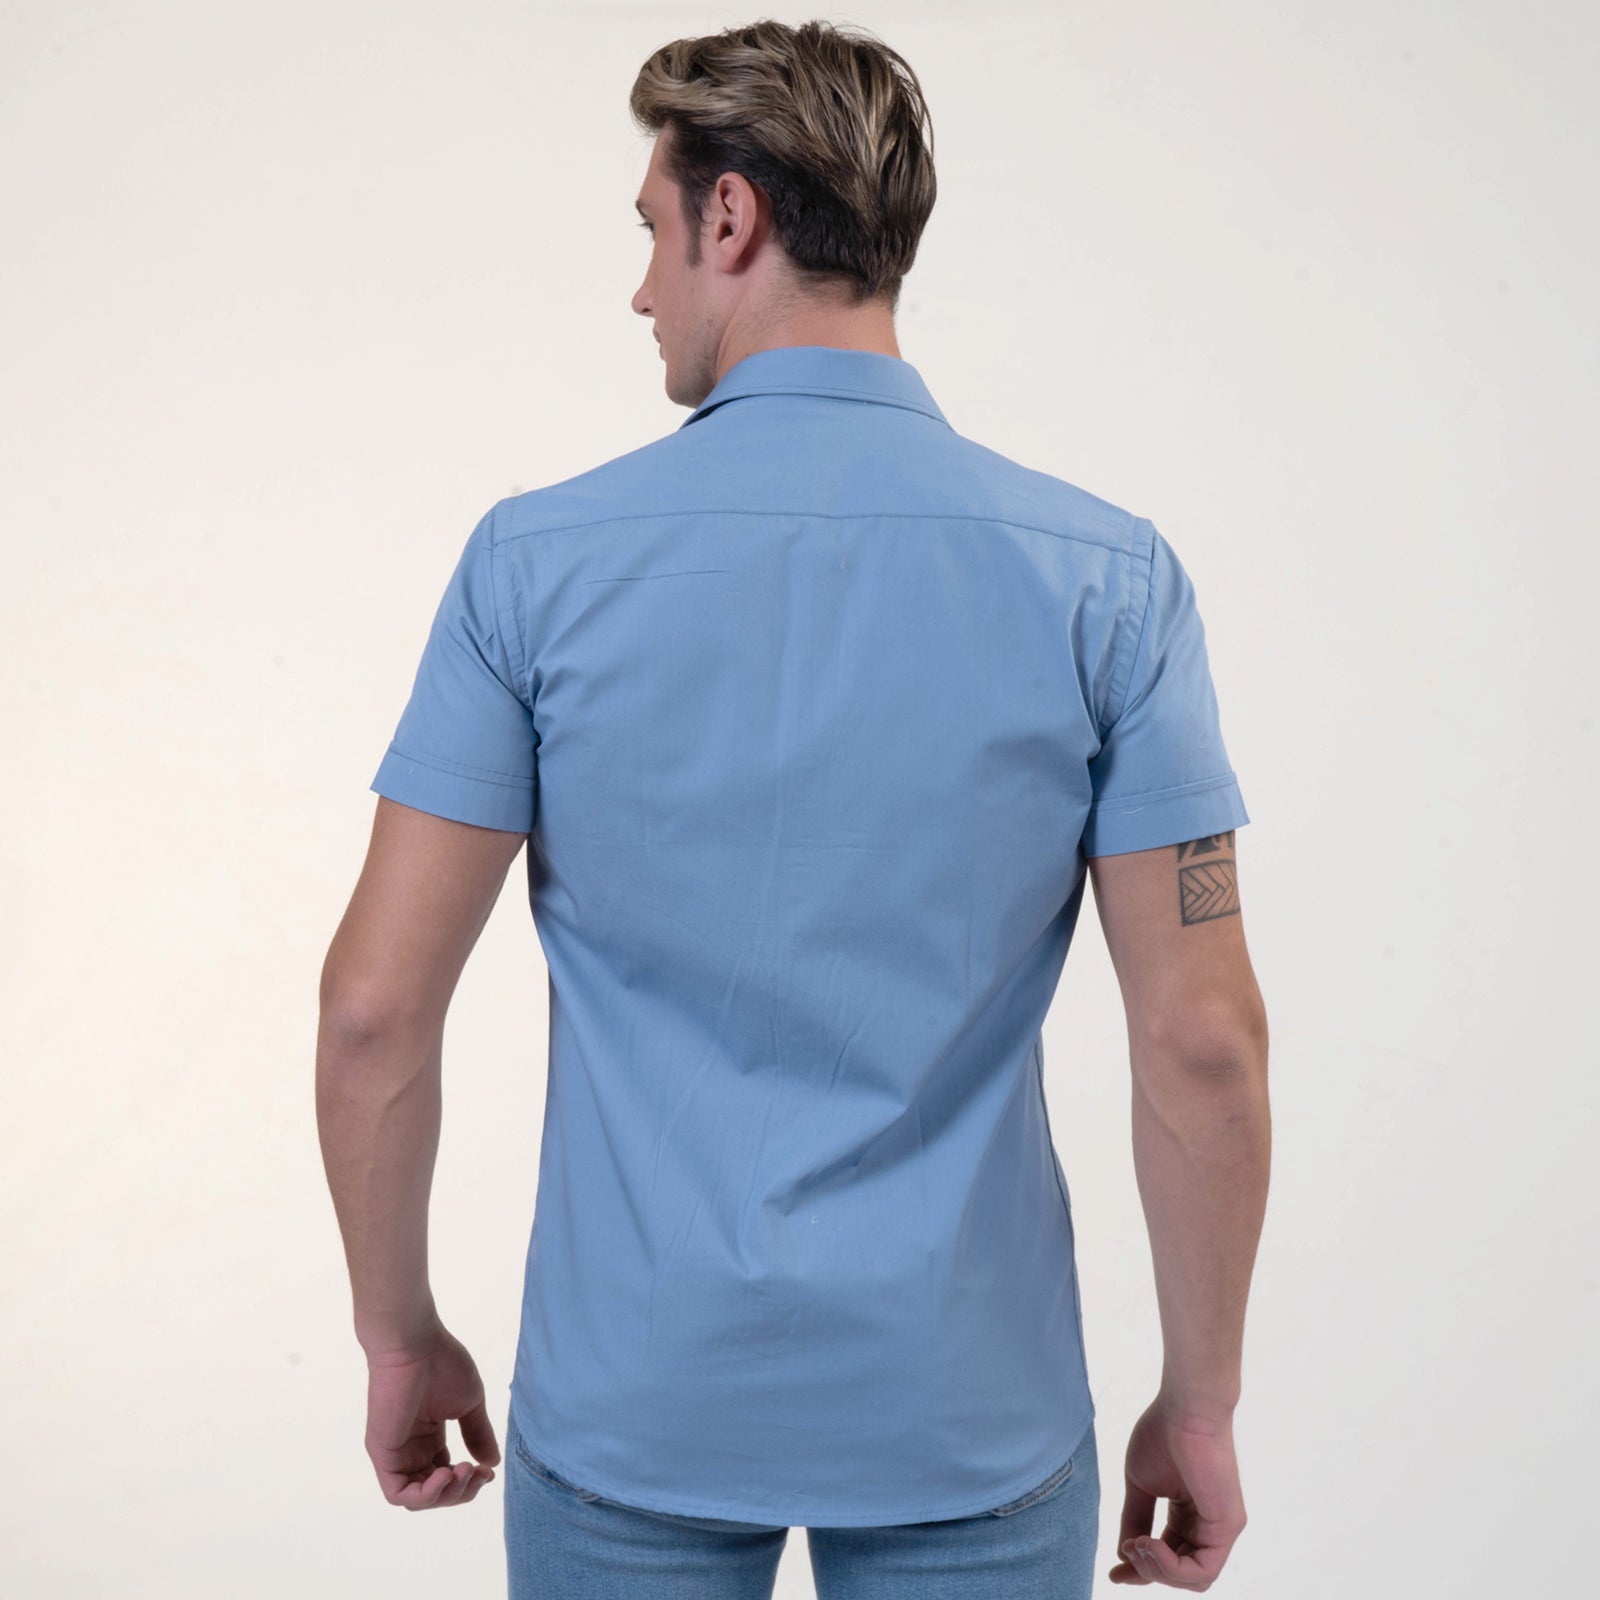 Solid Blue With White Mens Short Sleeve Button up Shirts - Tailored Slim Fit Cotton Dress Shirts